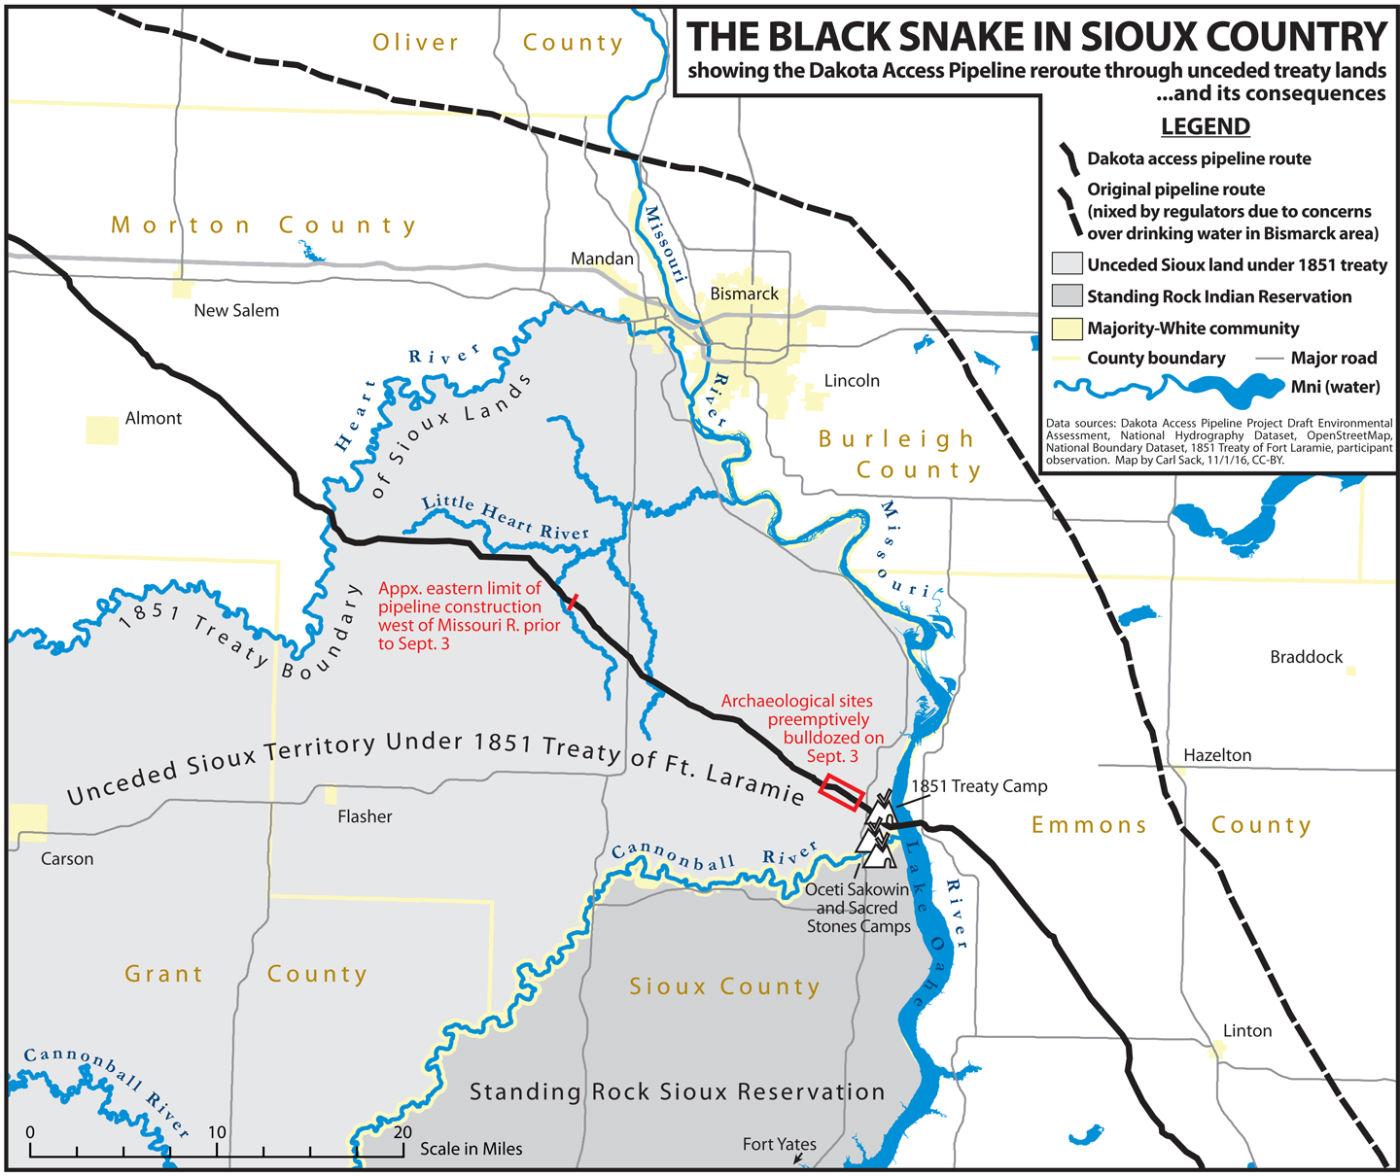 Mr Sack's map shows the threat to the Sioux tribe's water source